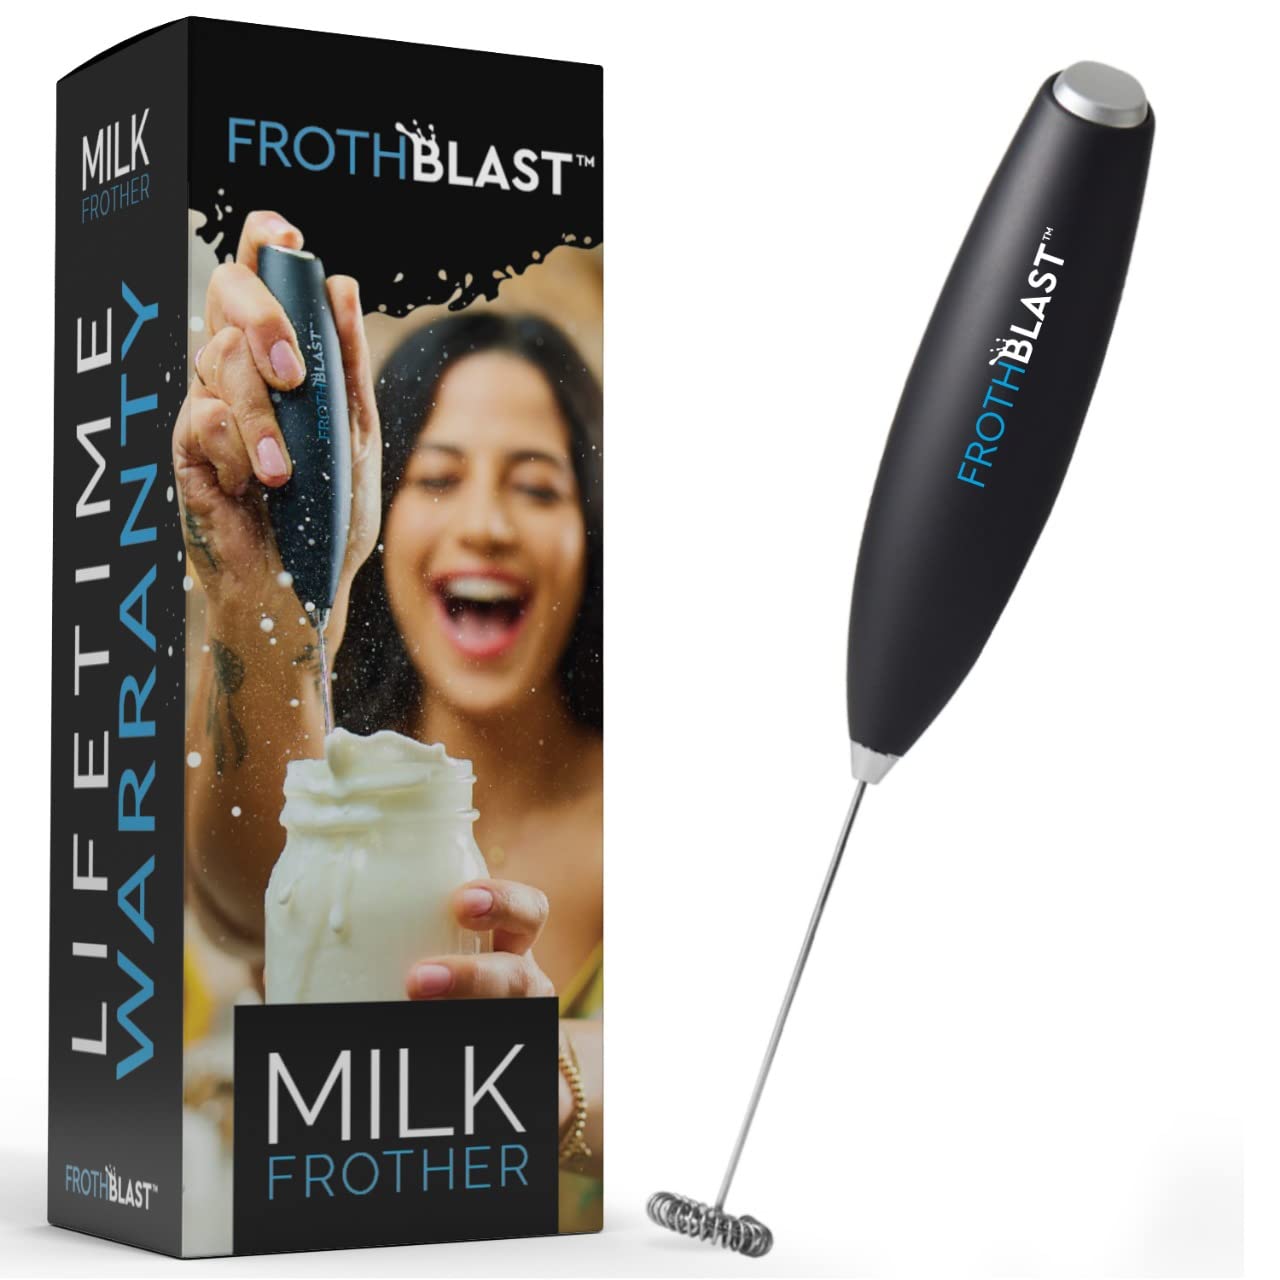 FrothBlast Milk Frother